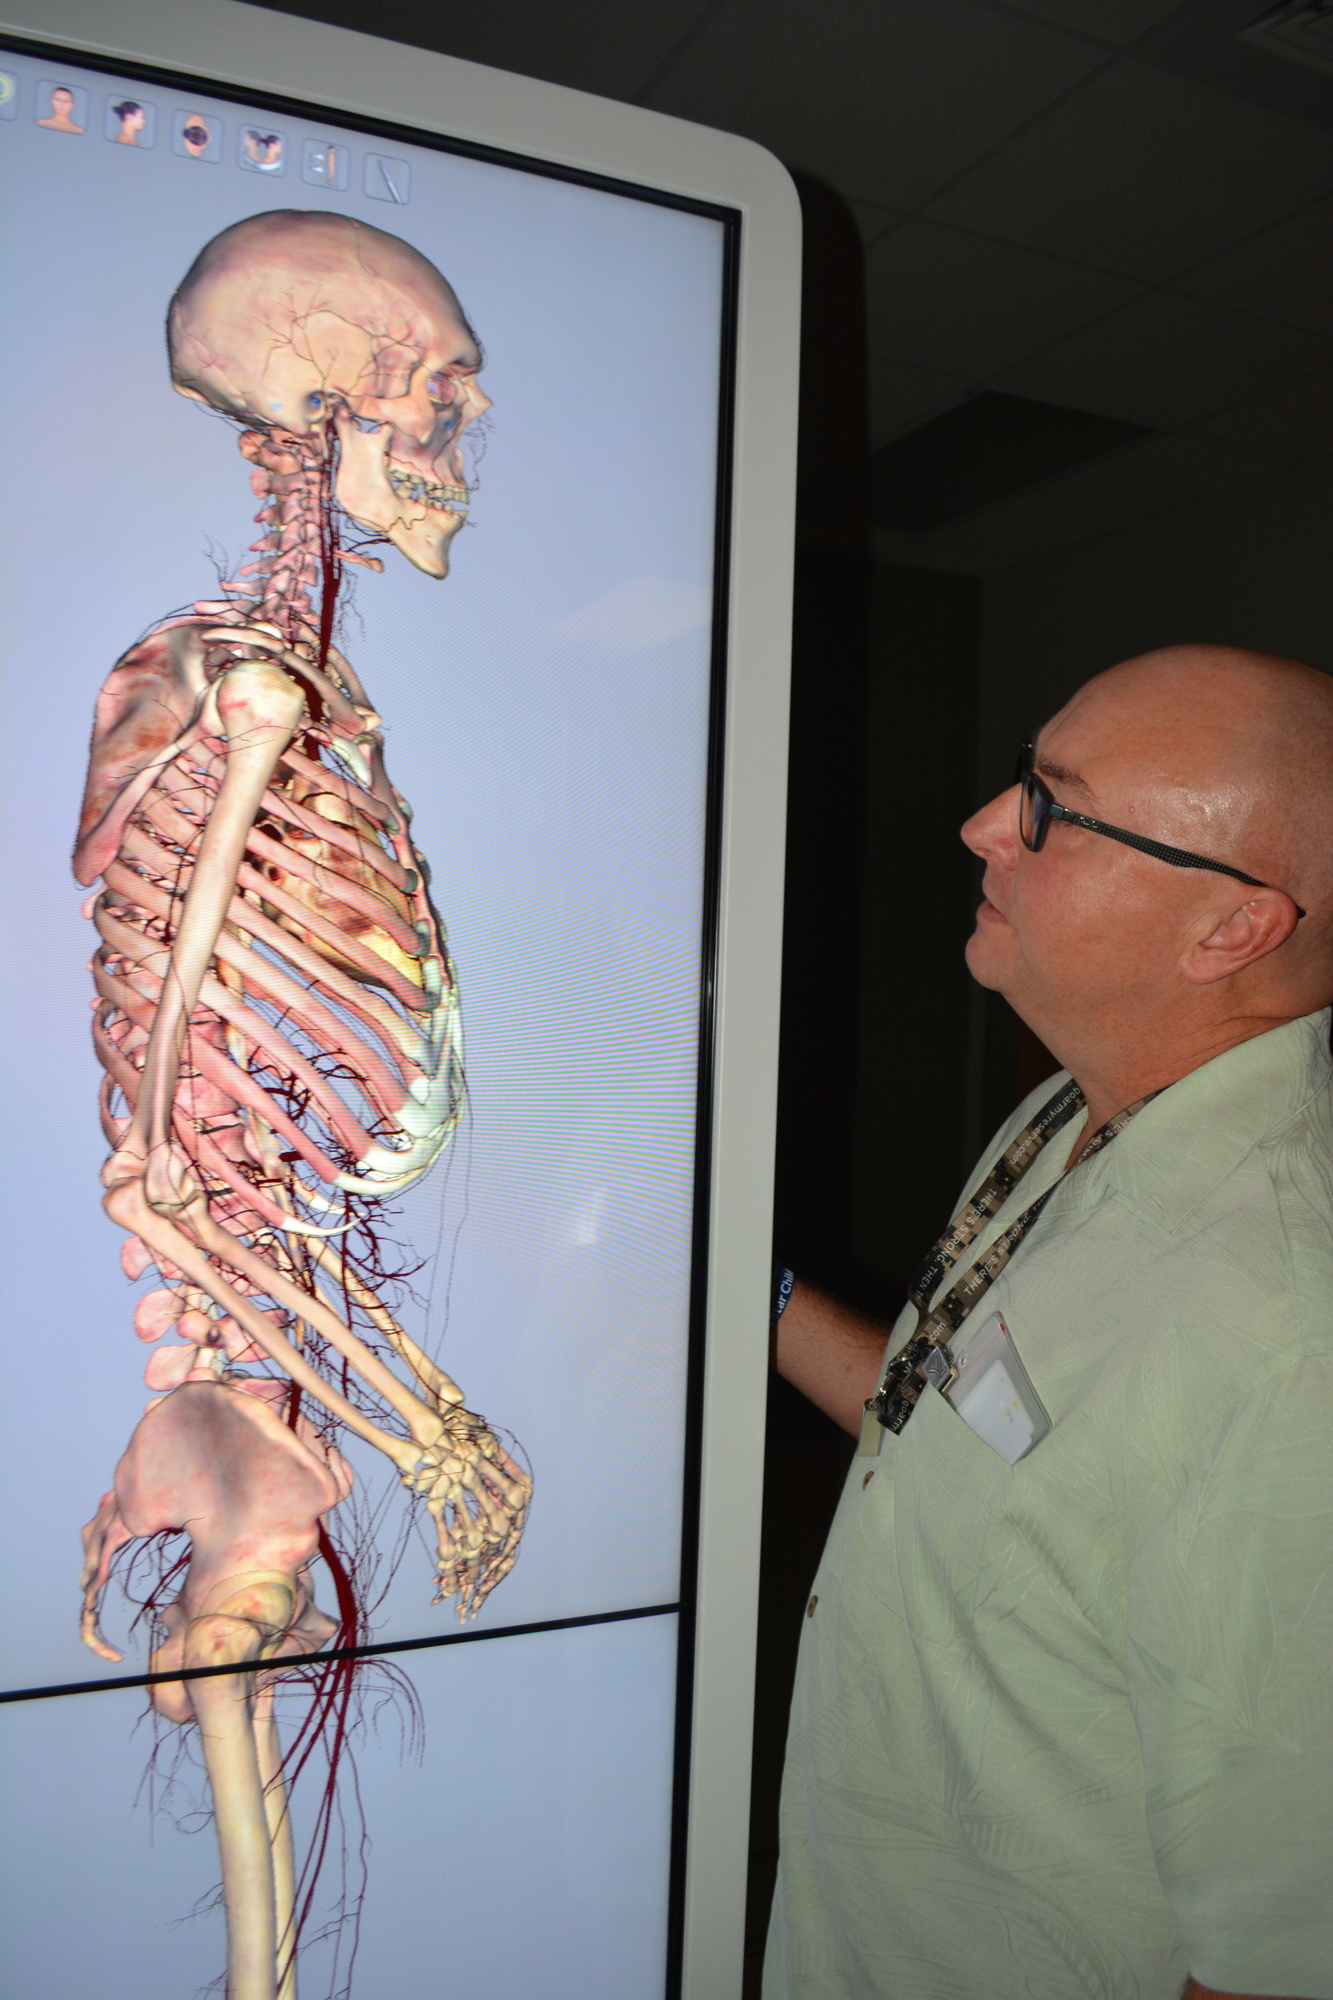 The Anatomage table brings learning to life at MTC.